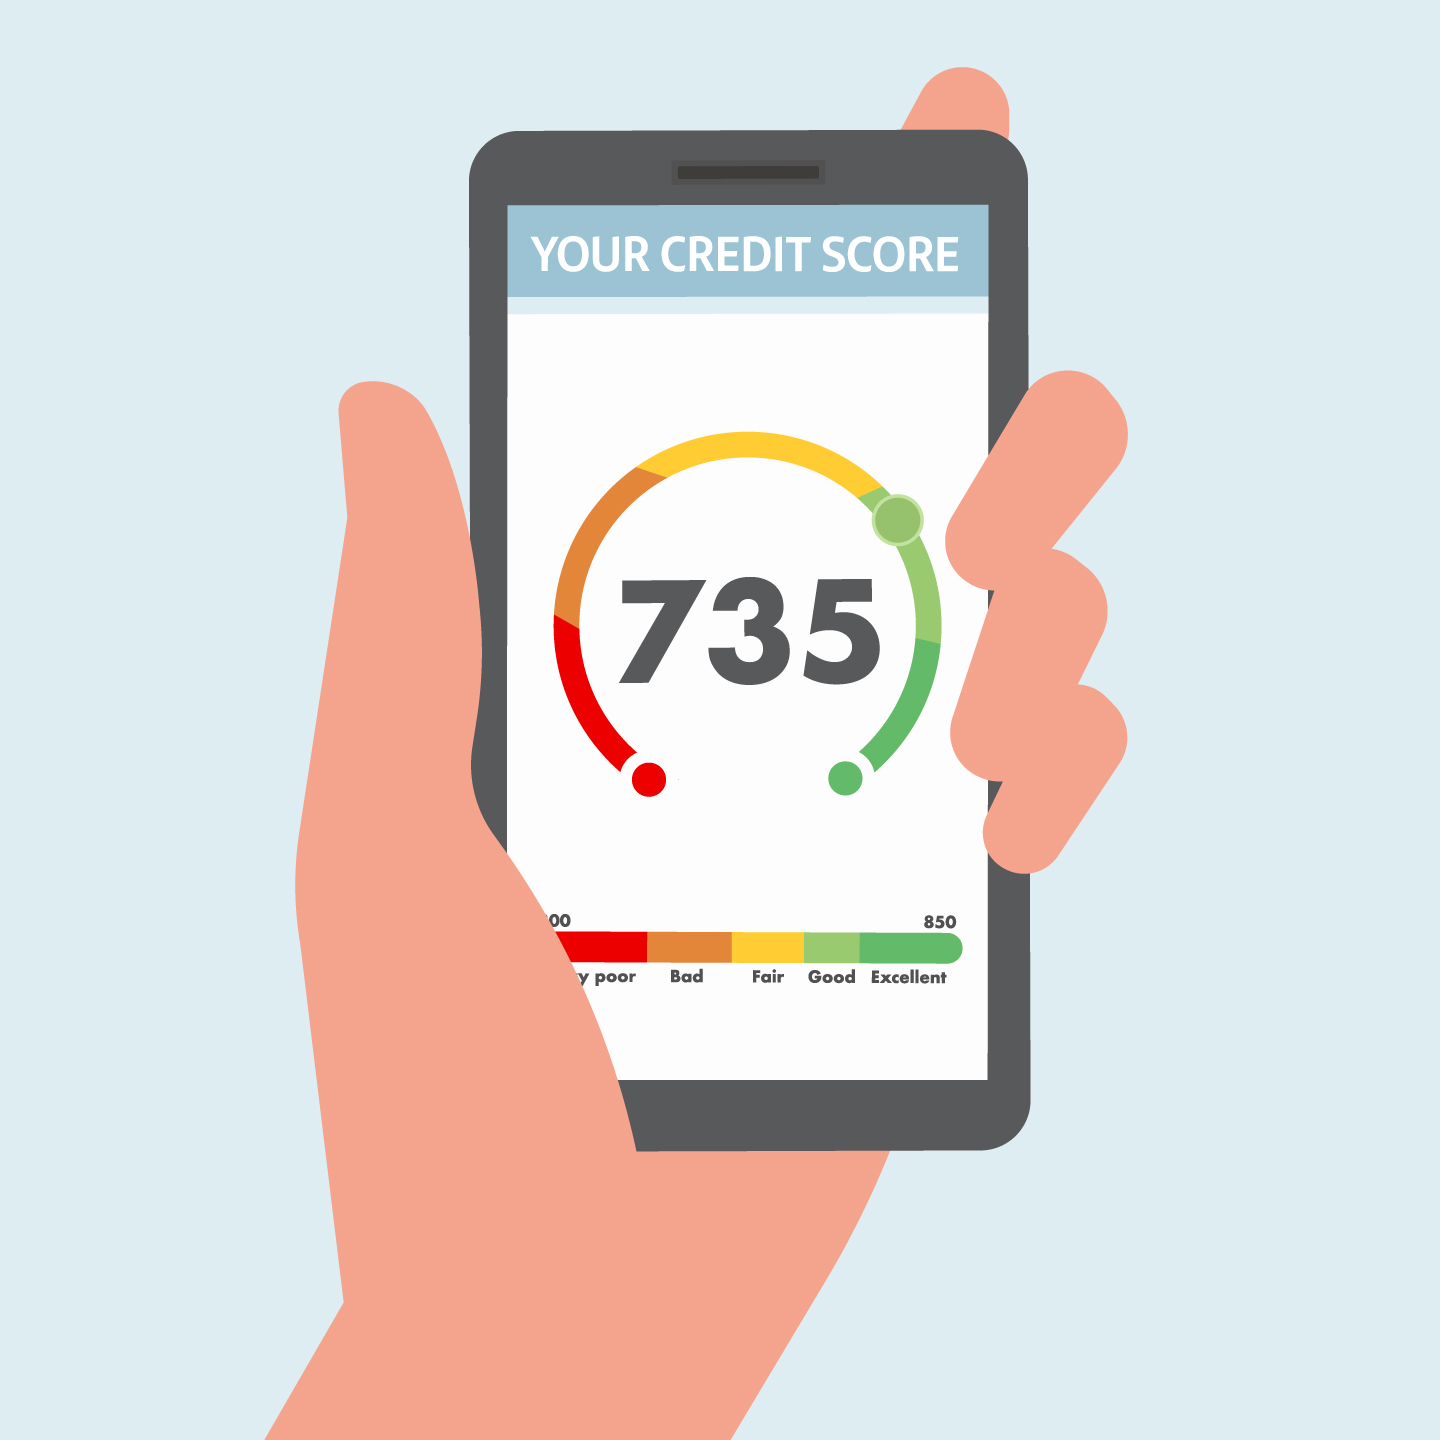 Credit score number of 735 on a smartphone with an Excellent score